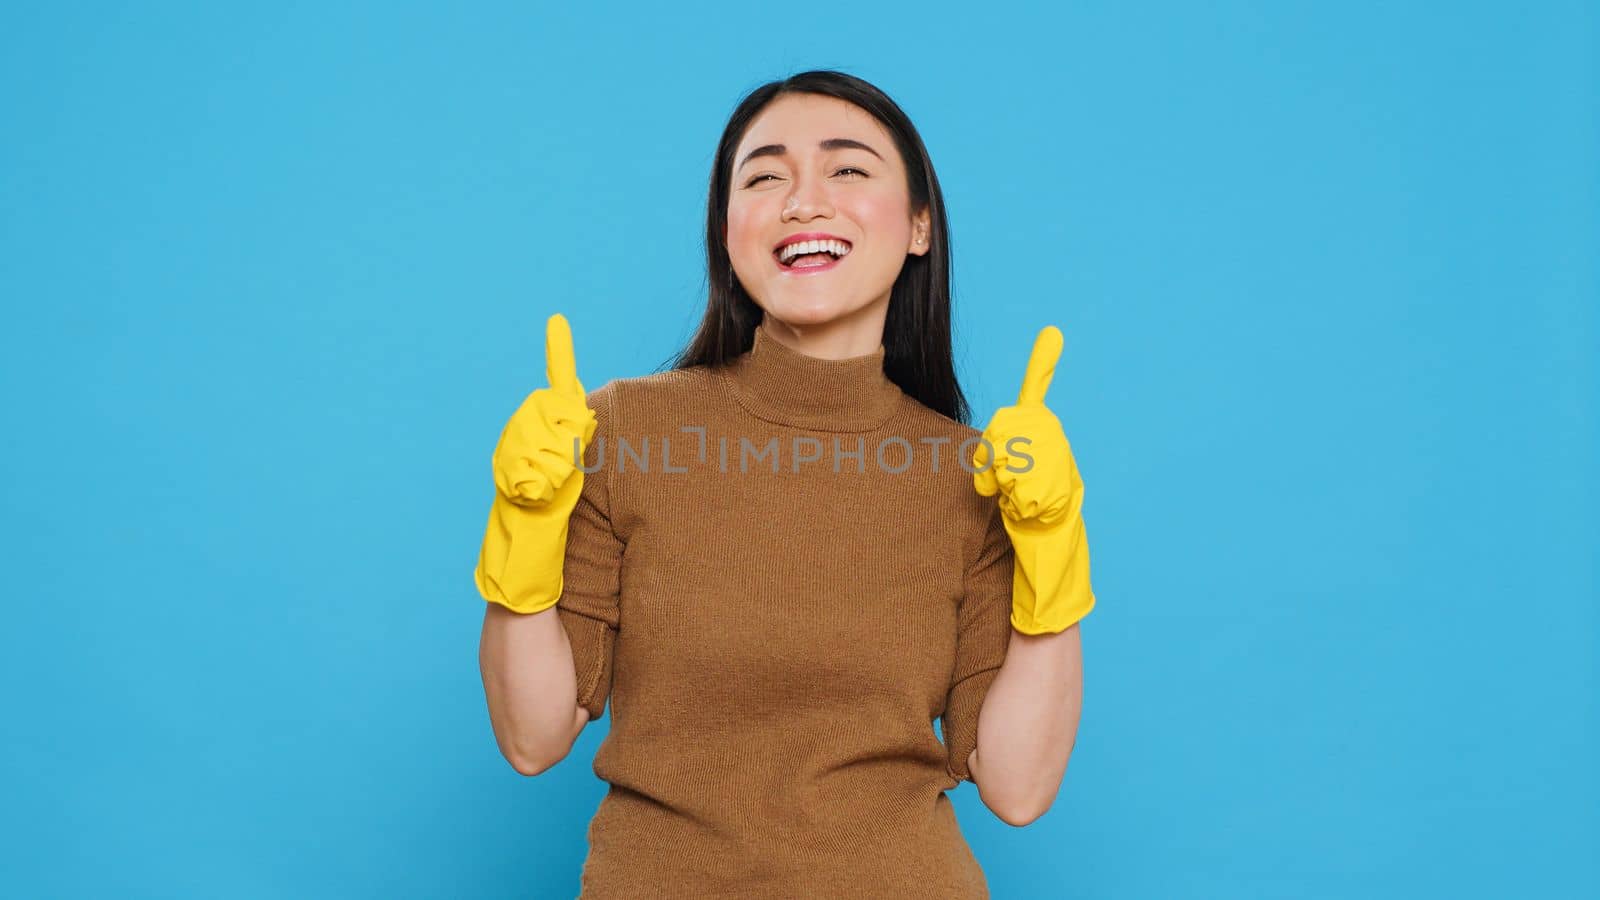 Positive joyful maid smiling while doing ok gesture after finishing to clean client house, posing in studio over blue background. Cheerful housekeeper is responsible for providing cleaning services